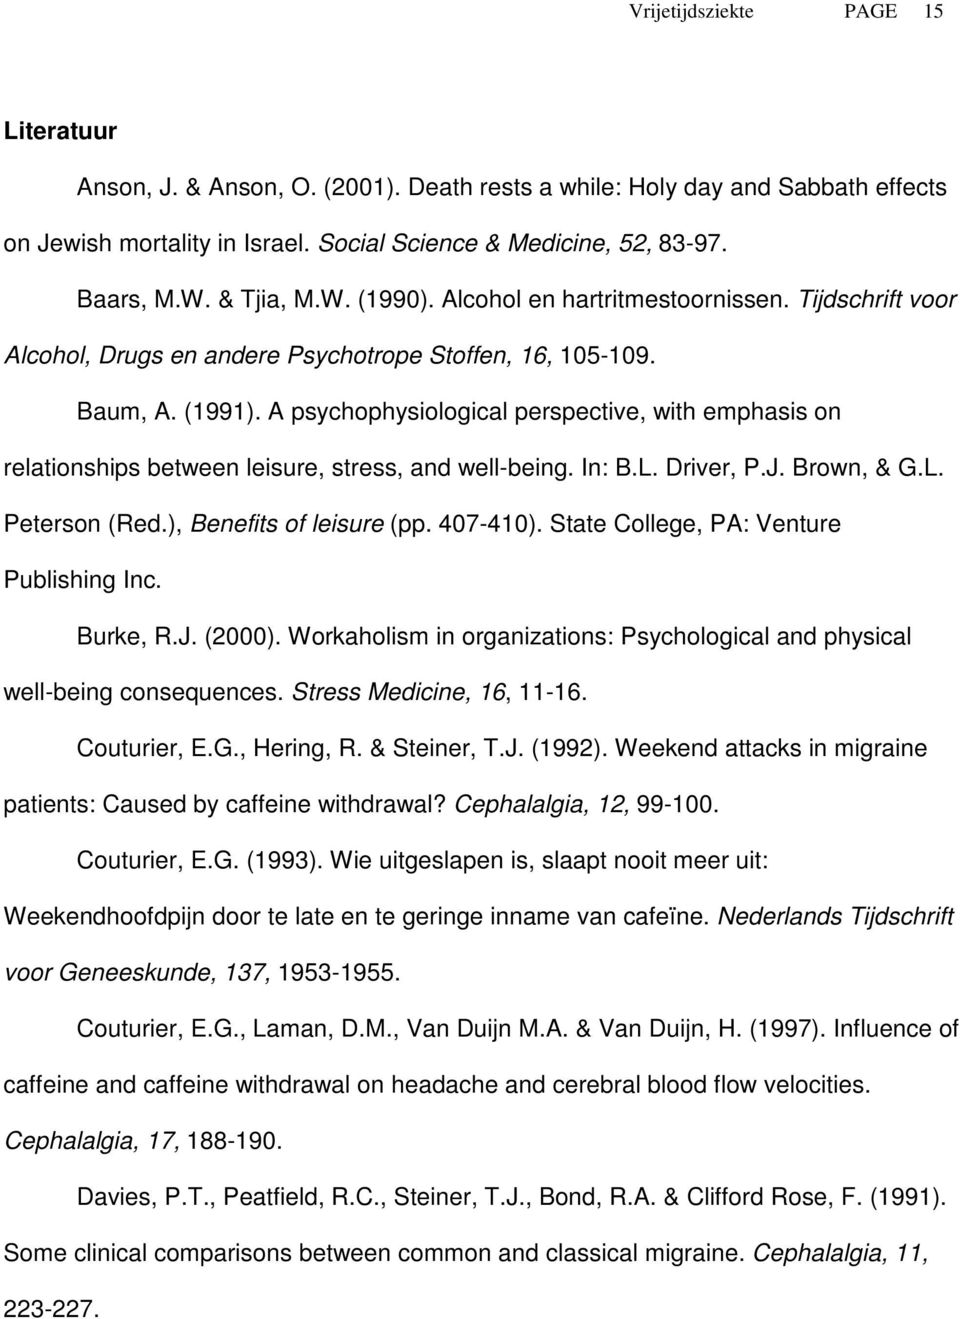 A psychophysiological perspective, with emphasis on relationships between leisure, stress, and well-being. In: B.L. Driver, P.J. Brown, & G.L. Peterson (Red.), Benefits of leisure (pp. 407-410).